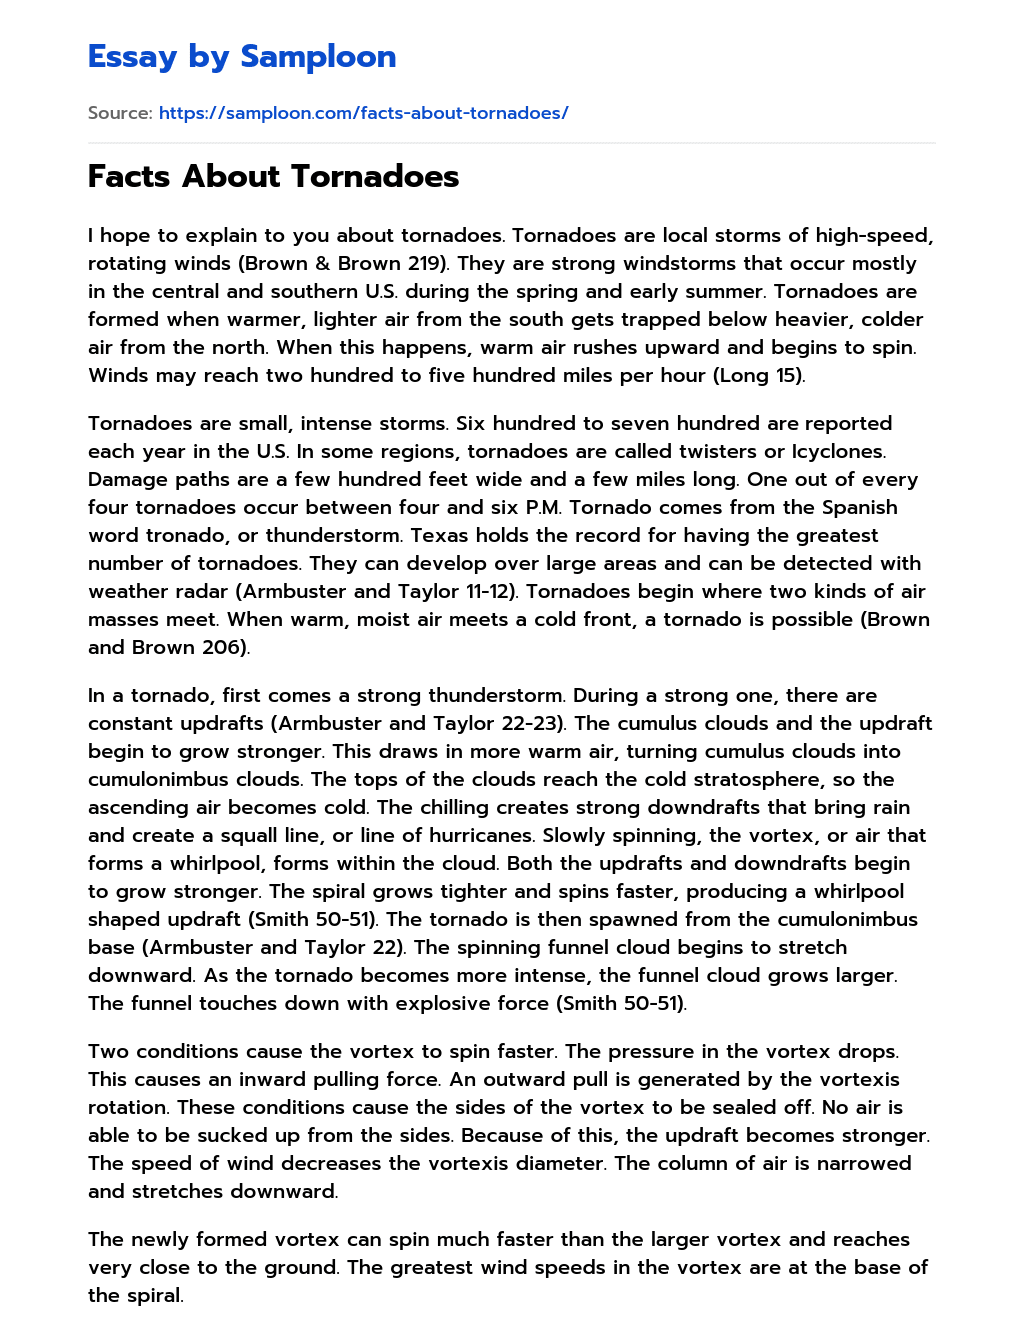 Facts About Tornadoes essay